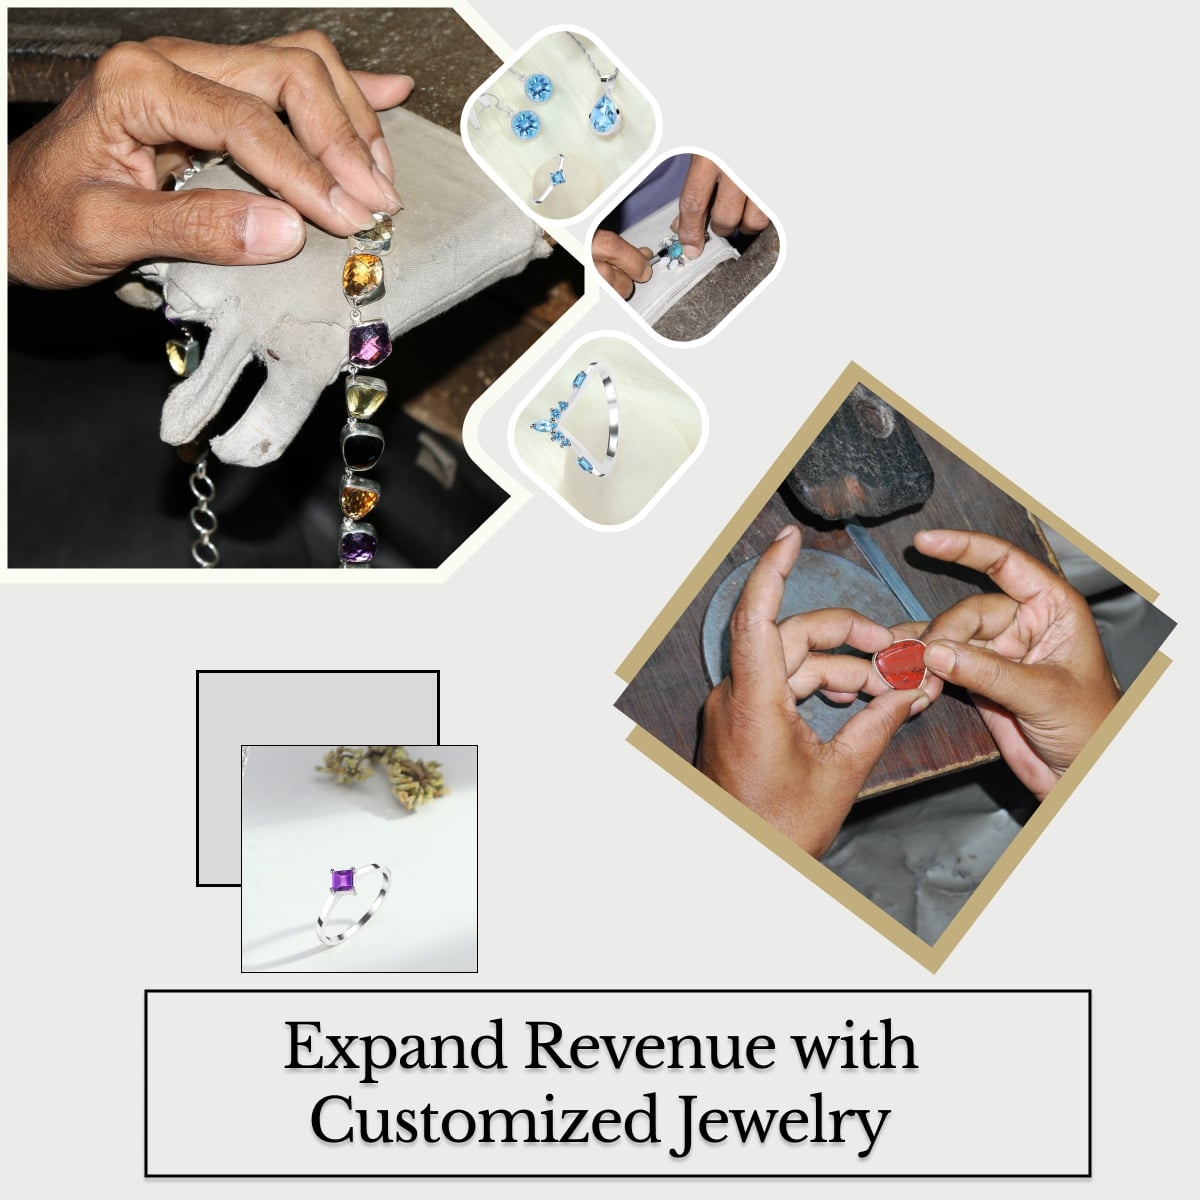 Reason 4: For Additional Revenue, You can offer Jewelry Customization